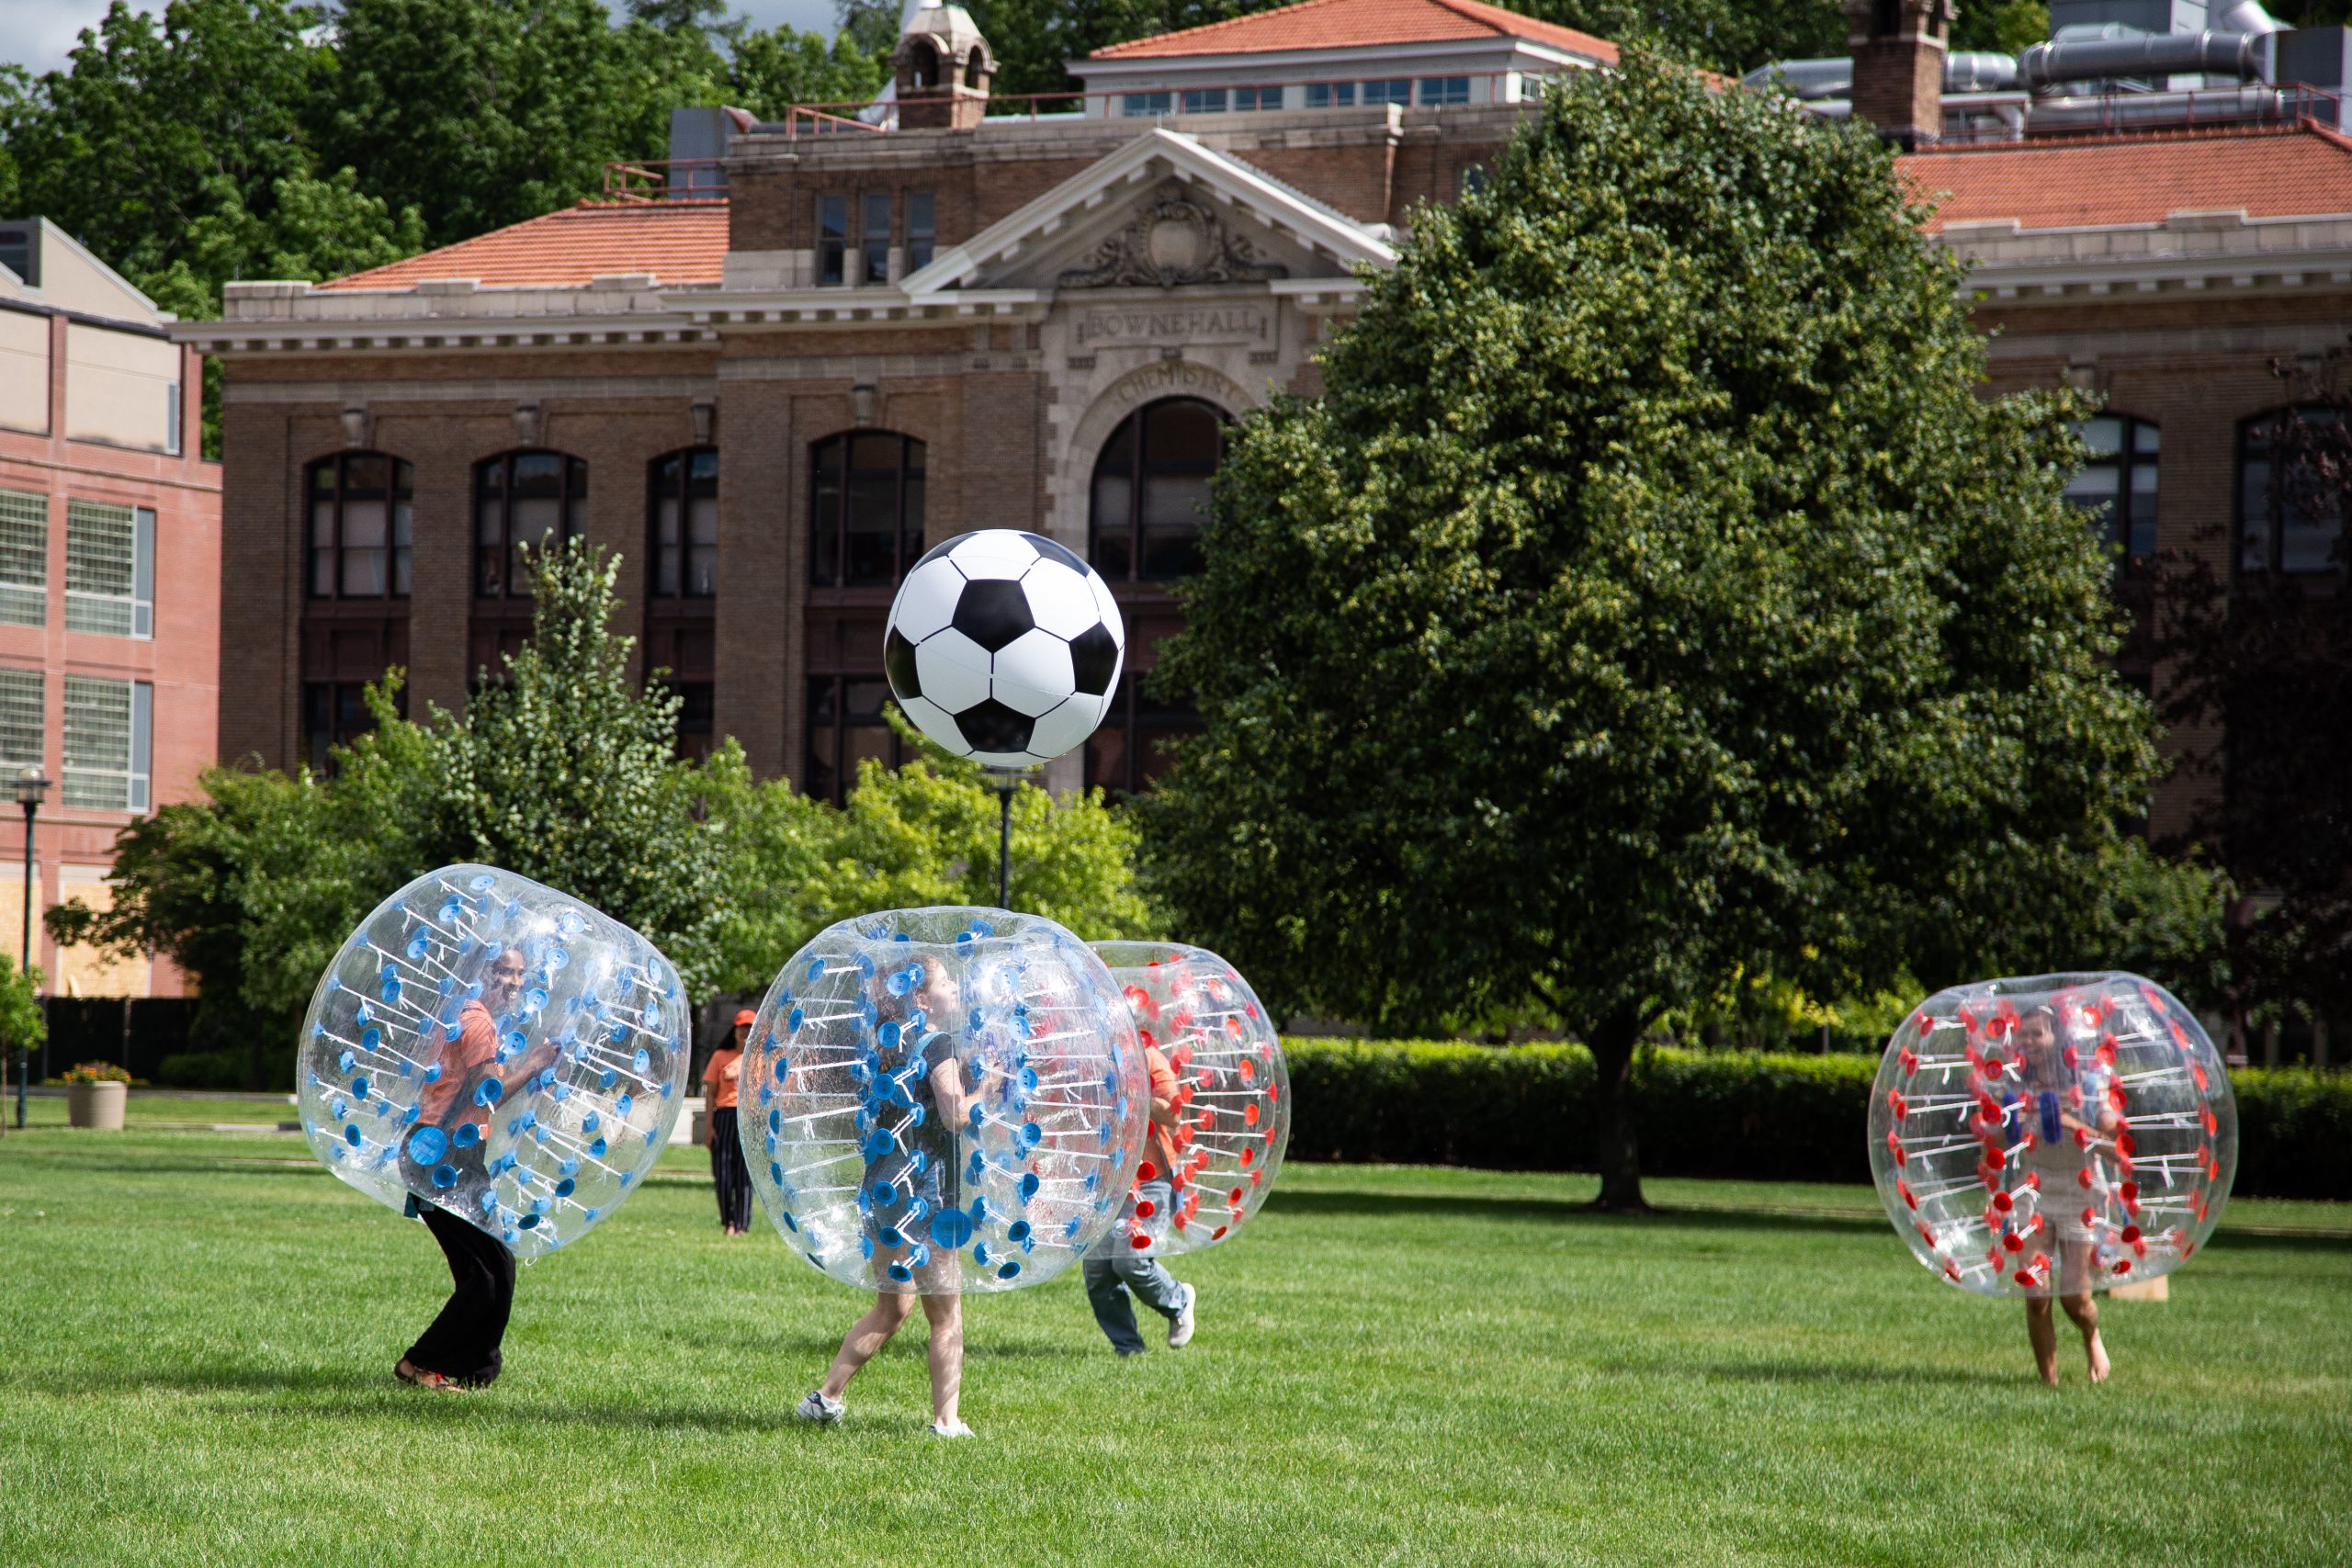 Several students wearing giant plastic bubbles, hitting an inflated soccer ball around outside.